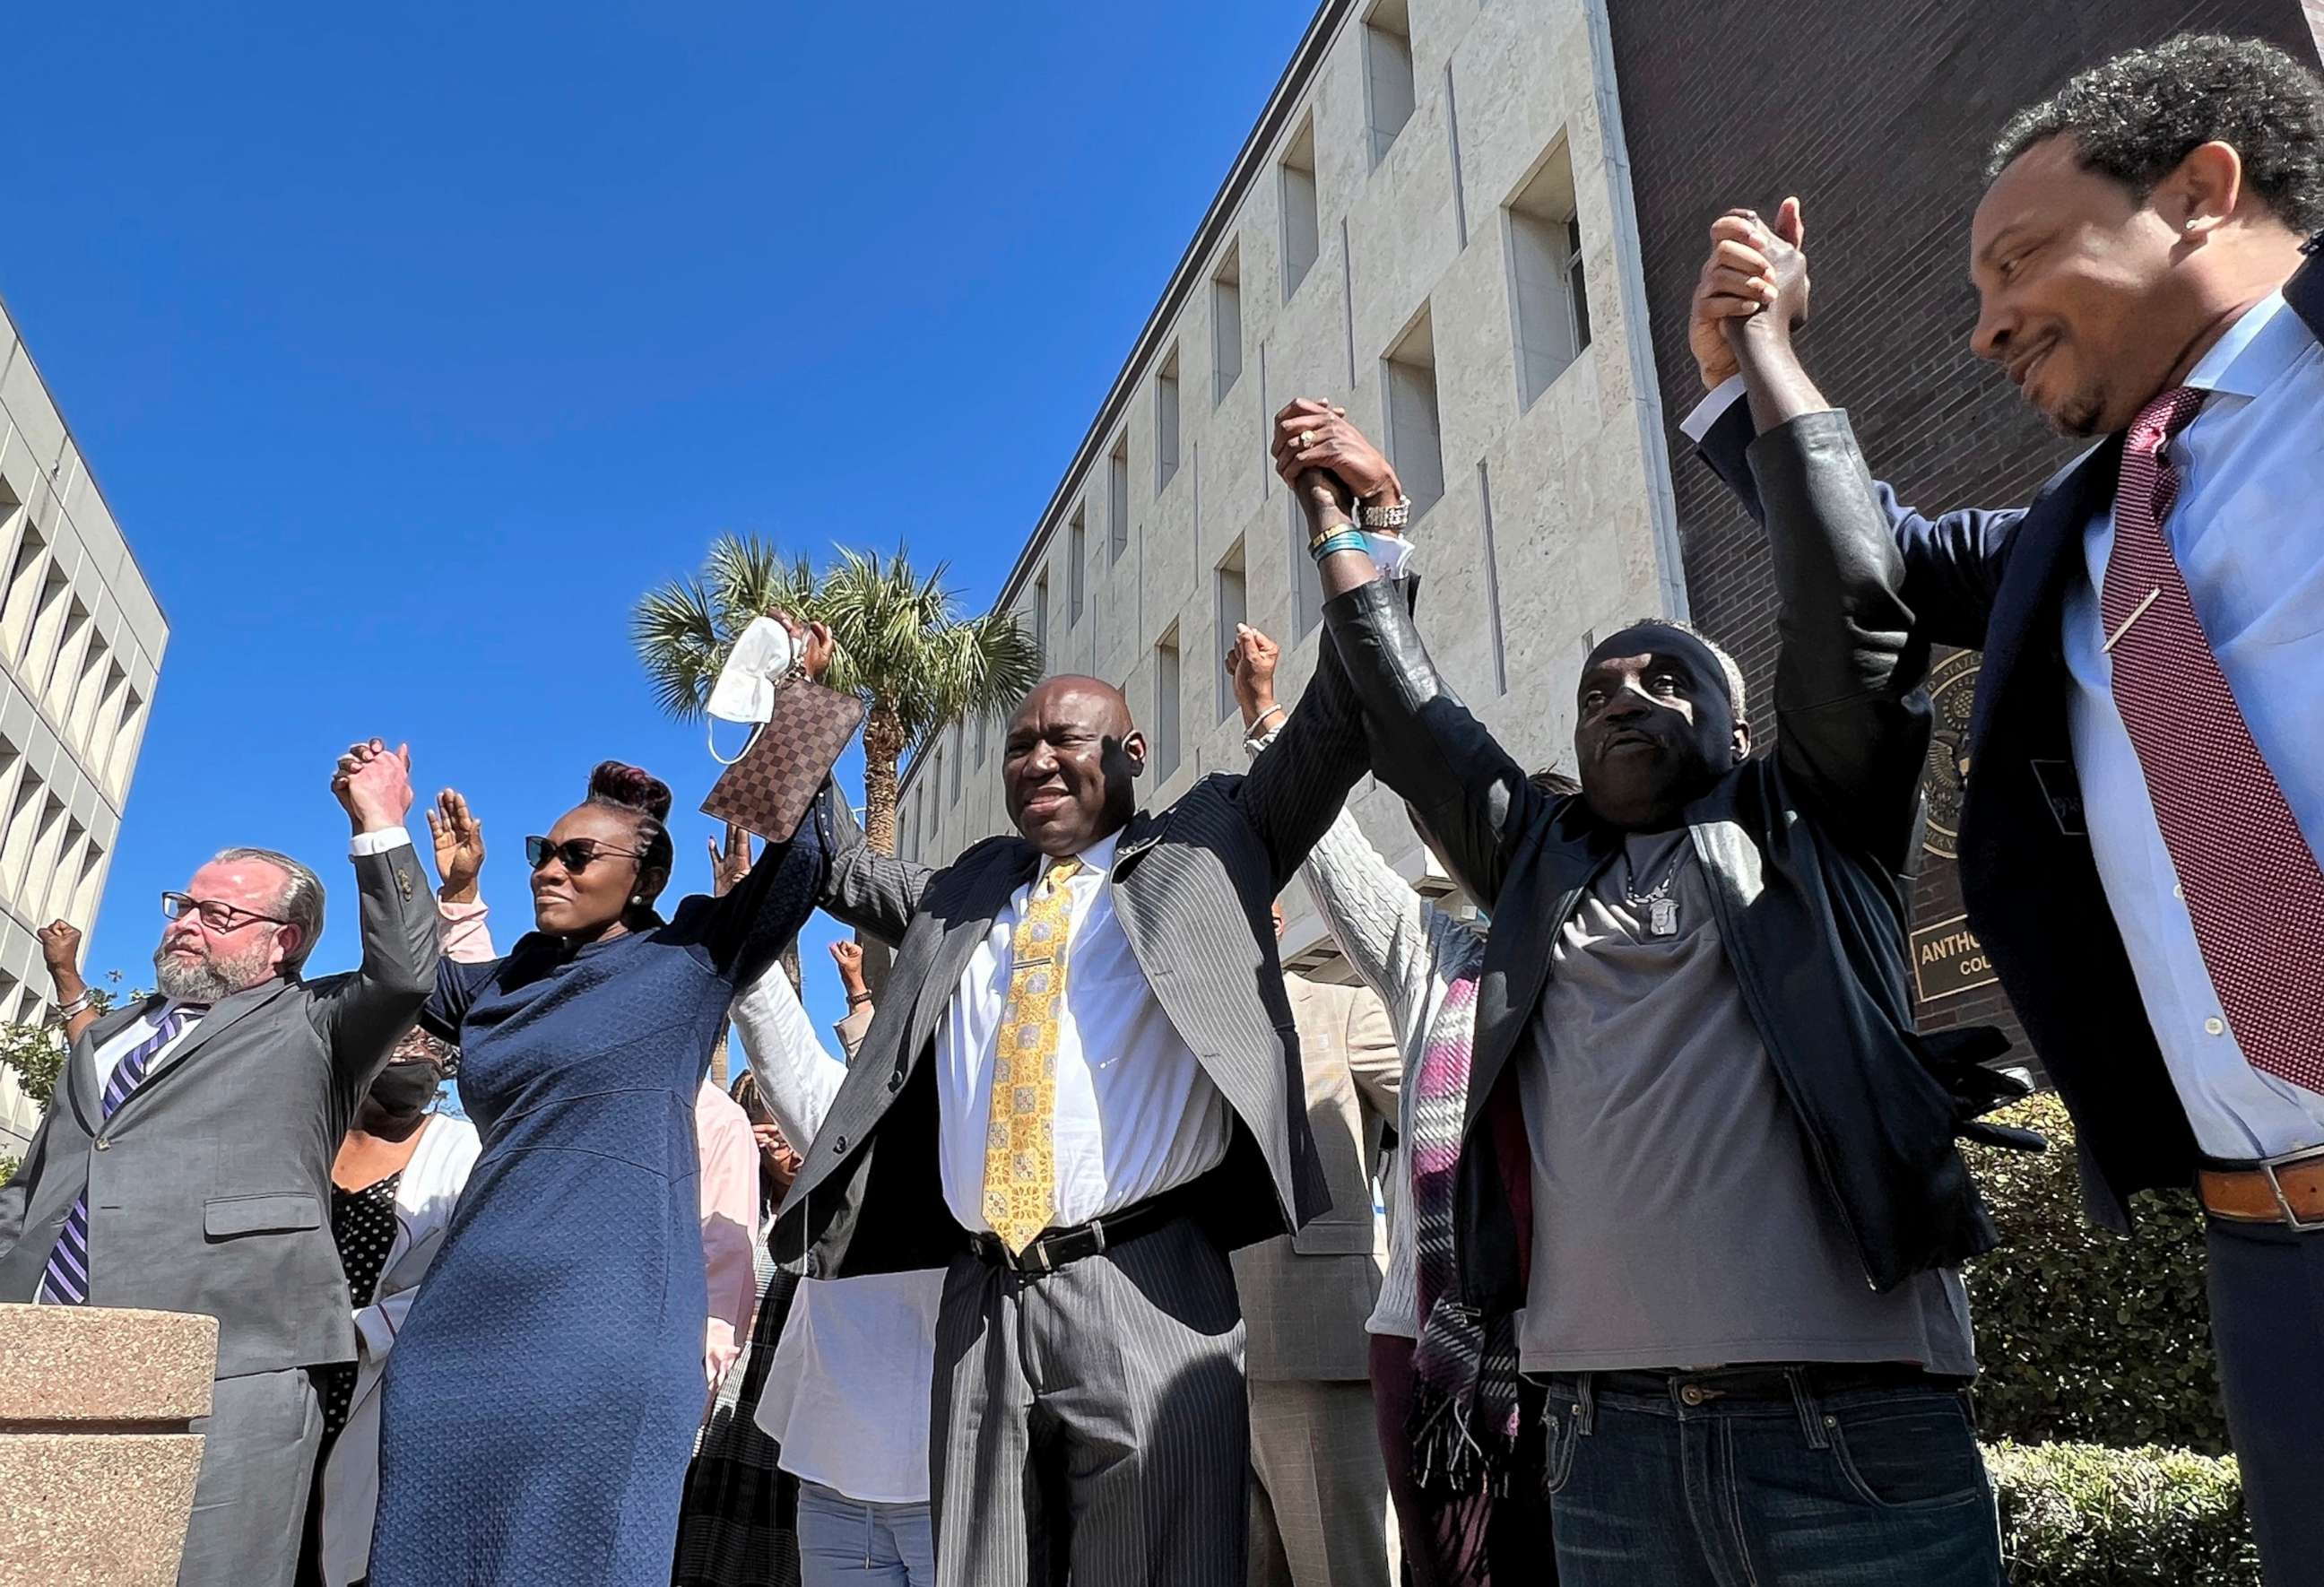 PHOTO: The family and attorneys of the Ahmaud Aubery raise their arms in victory after all three men were found guilty of hates crimes at the federal courthouse in Brunswick, Ga., Feb. 22, 2022.